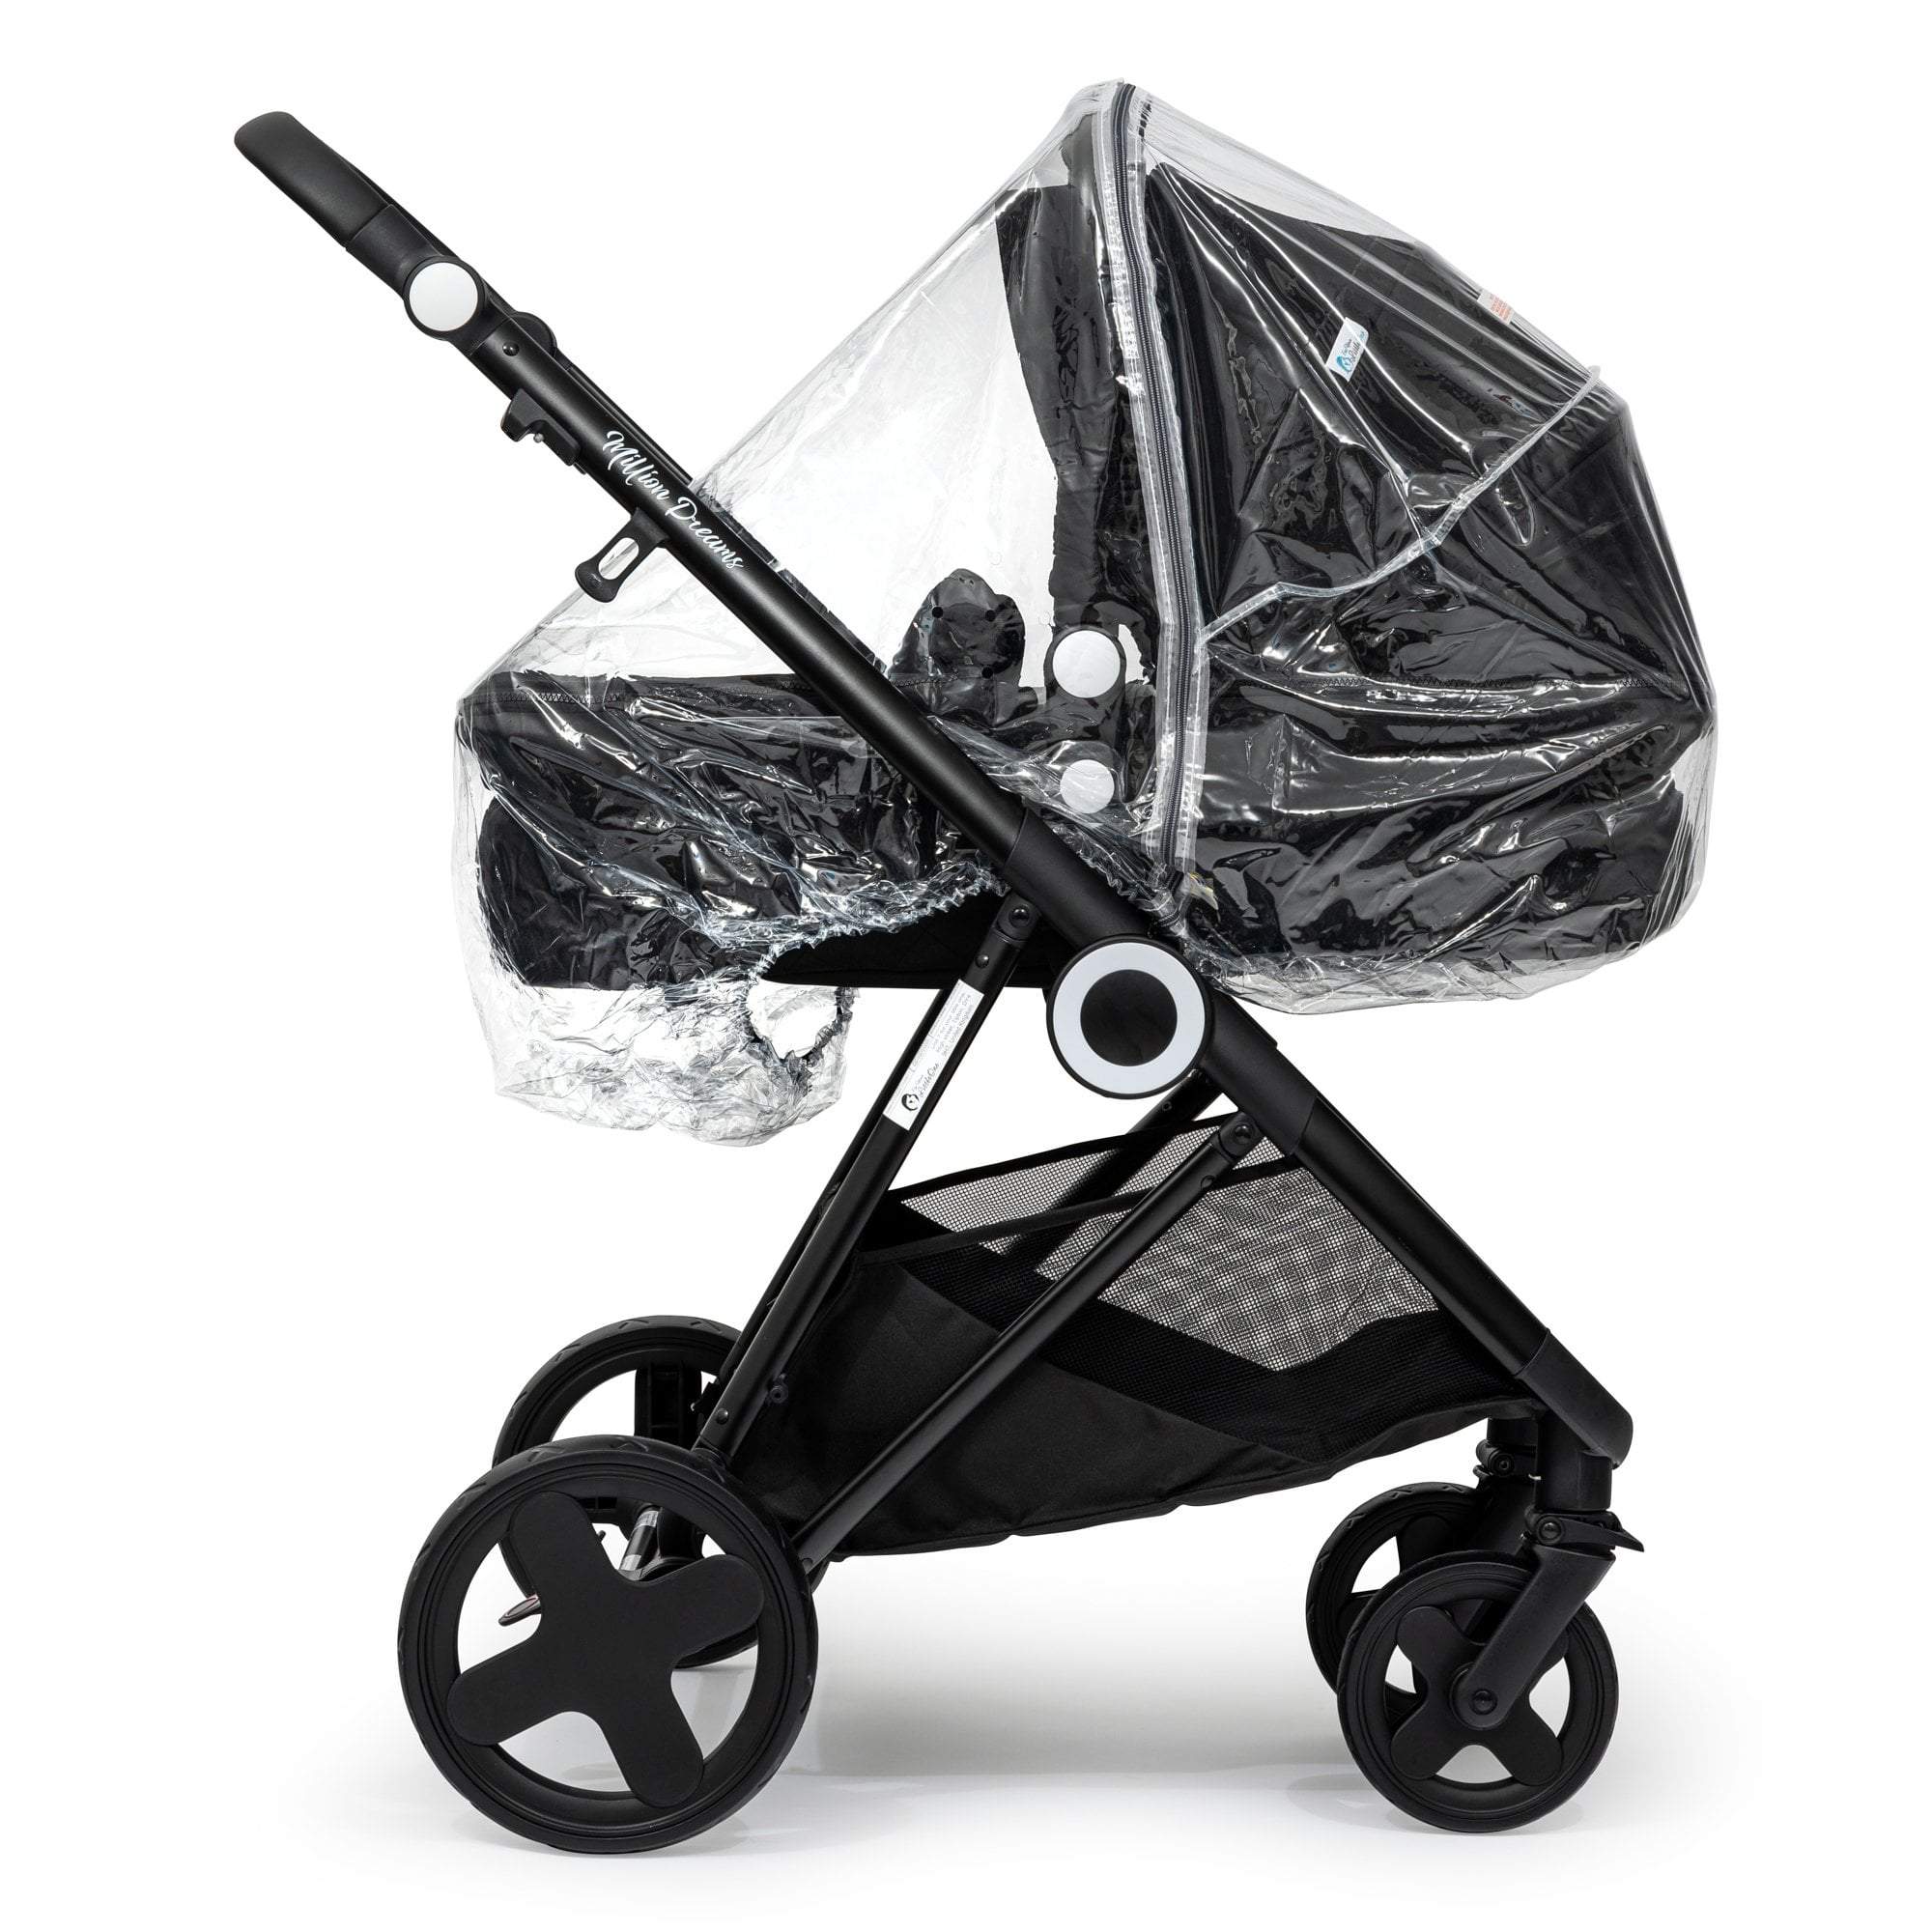 Carrycot Raincover Compatible With Mountain Buggy - Fits All Models - For Your Little One